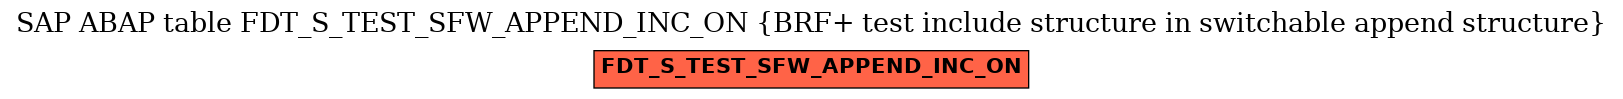 E-R Diagram for table FDT_S_TEST_SFW_APPEND_INC_ON (BRF+ test include structure in switchable append structure)